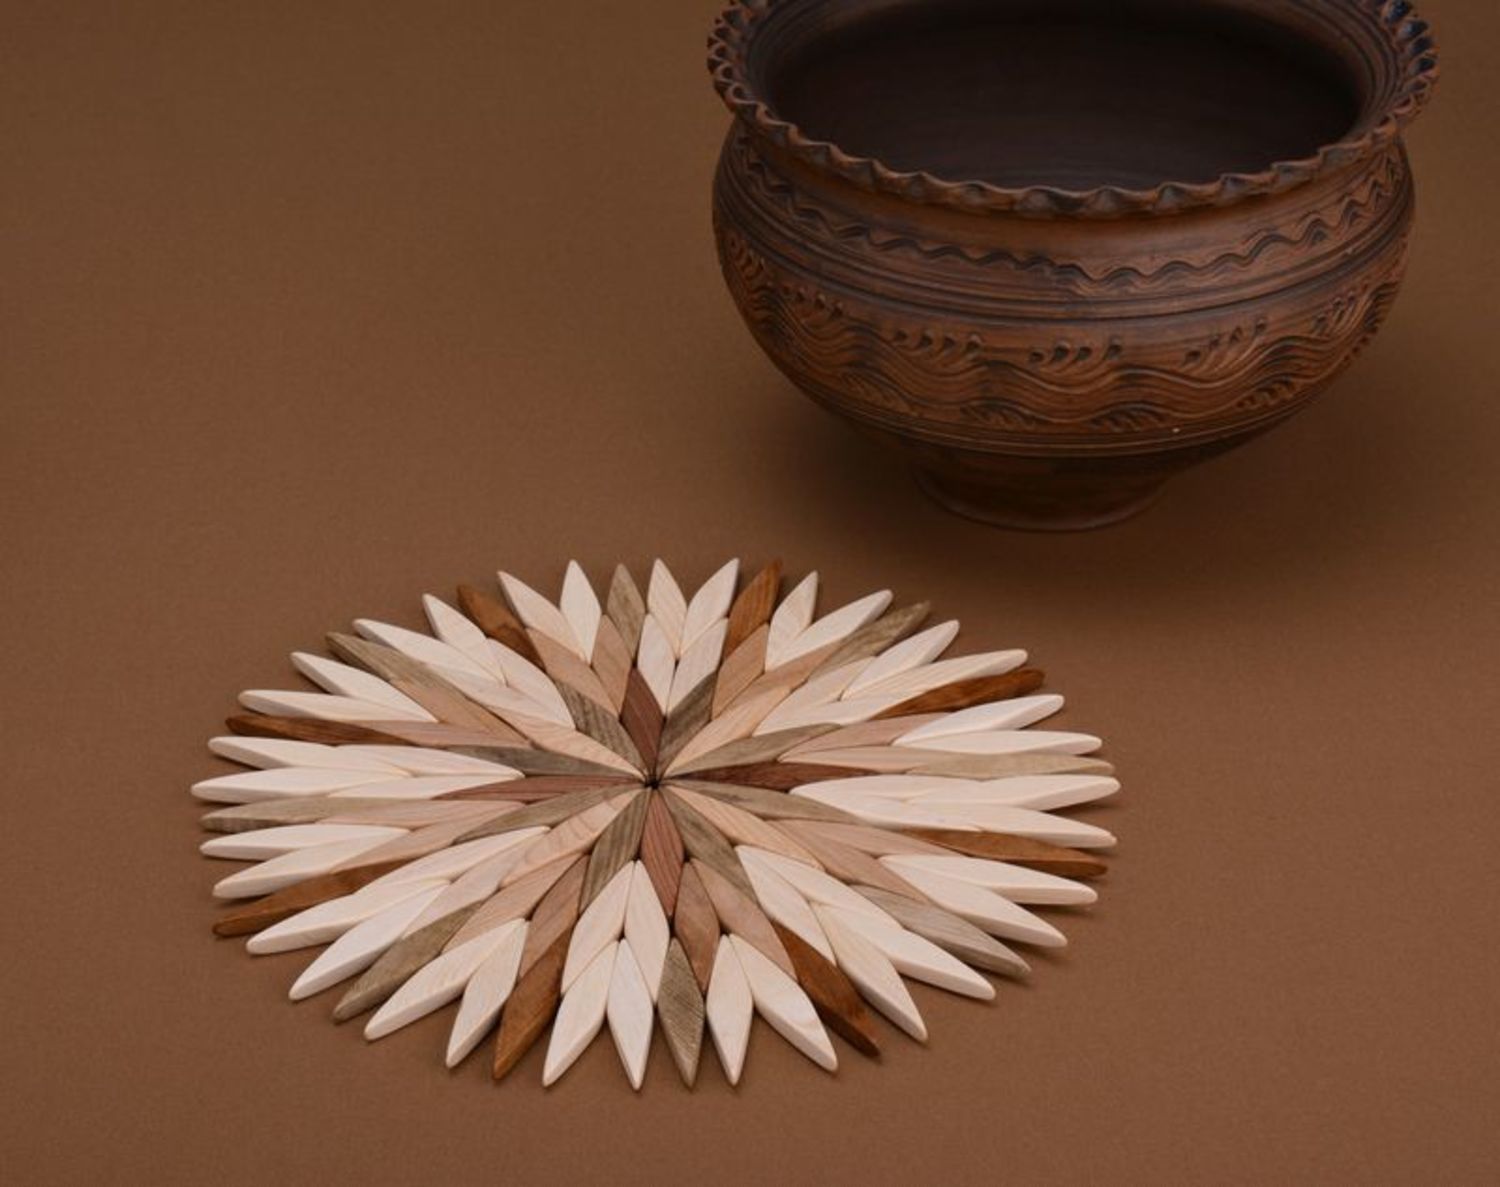 Coaster for hot dishes in the shape of a snowflake photo 4